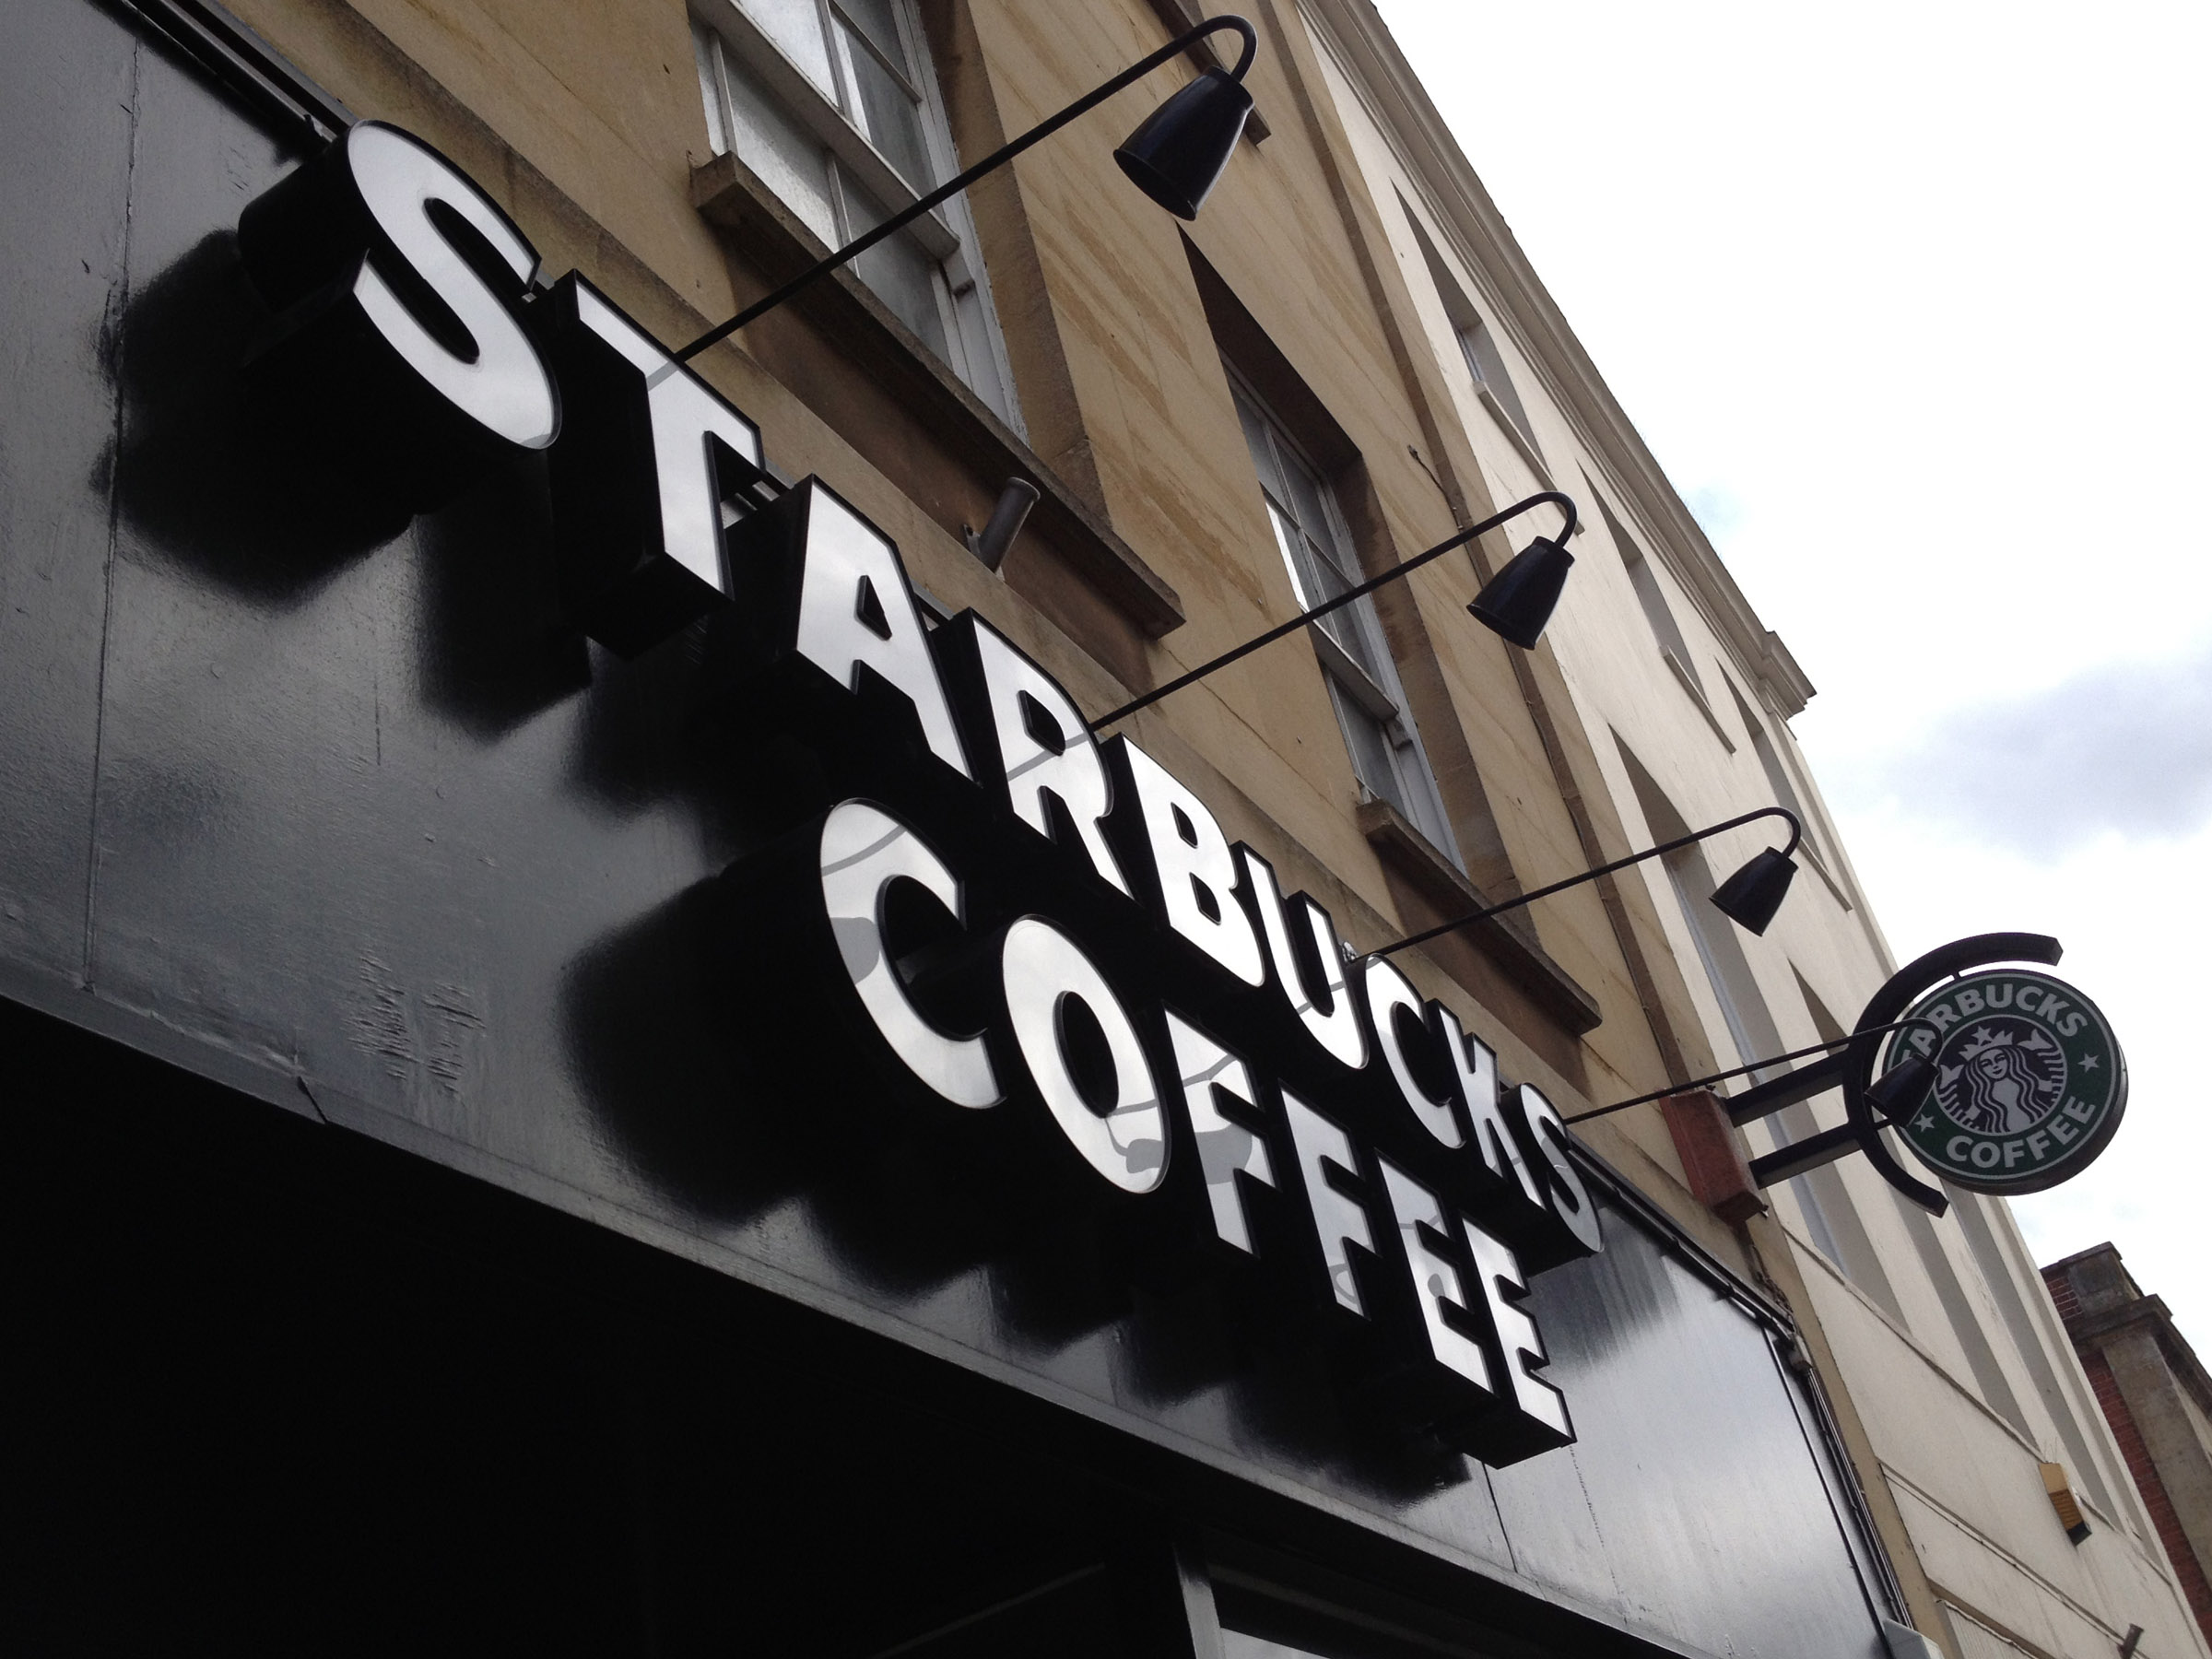 Starbucks pays not a bean in corporation tax, thanks to transfer